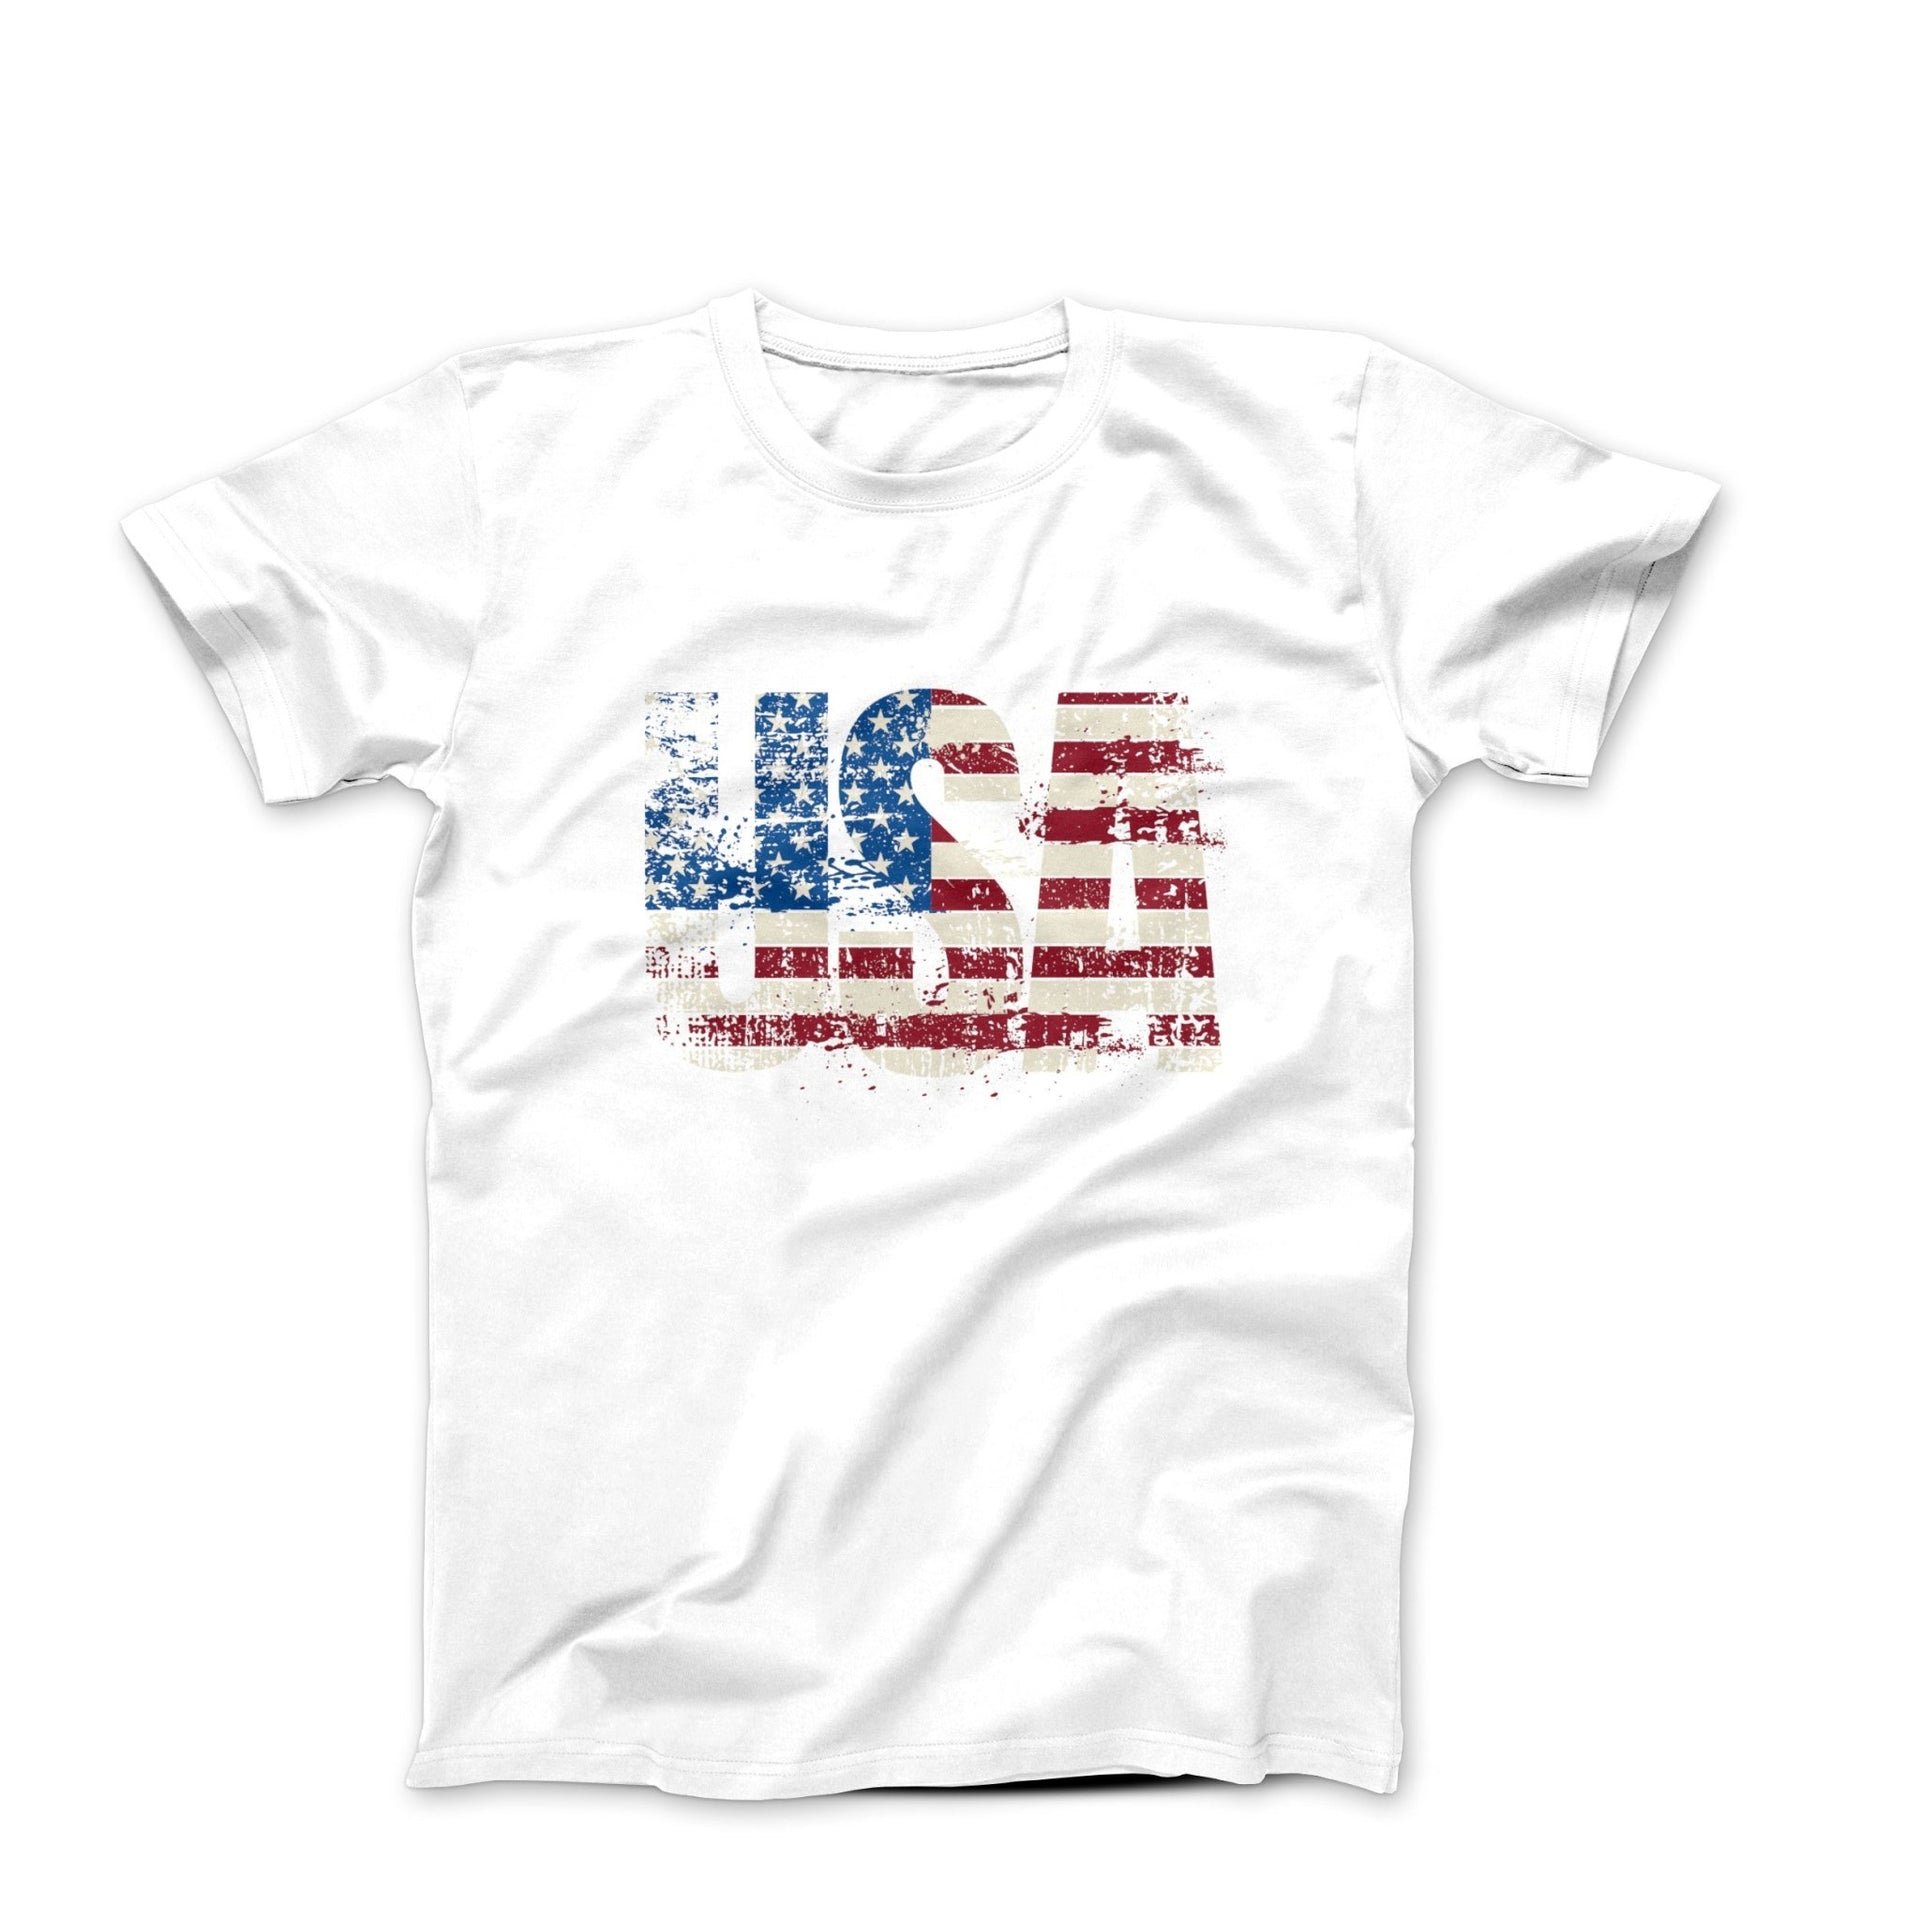 USA Made In America Graphic T-shirt - Clothing - Harvey Ltd